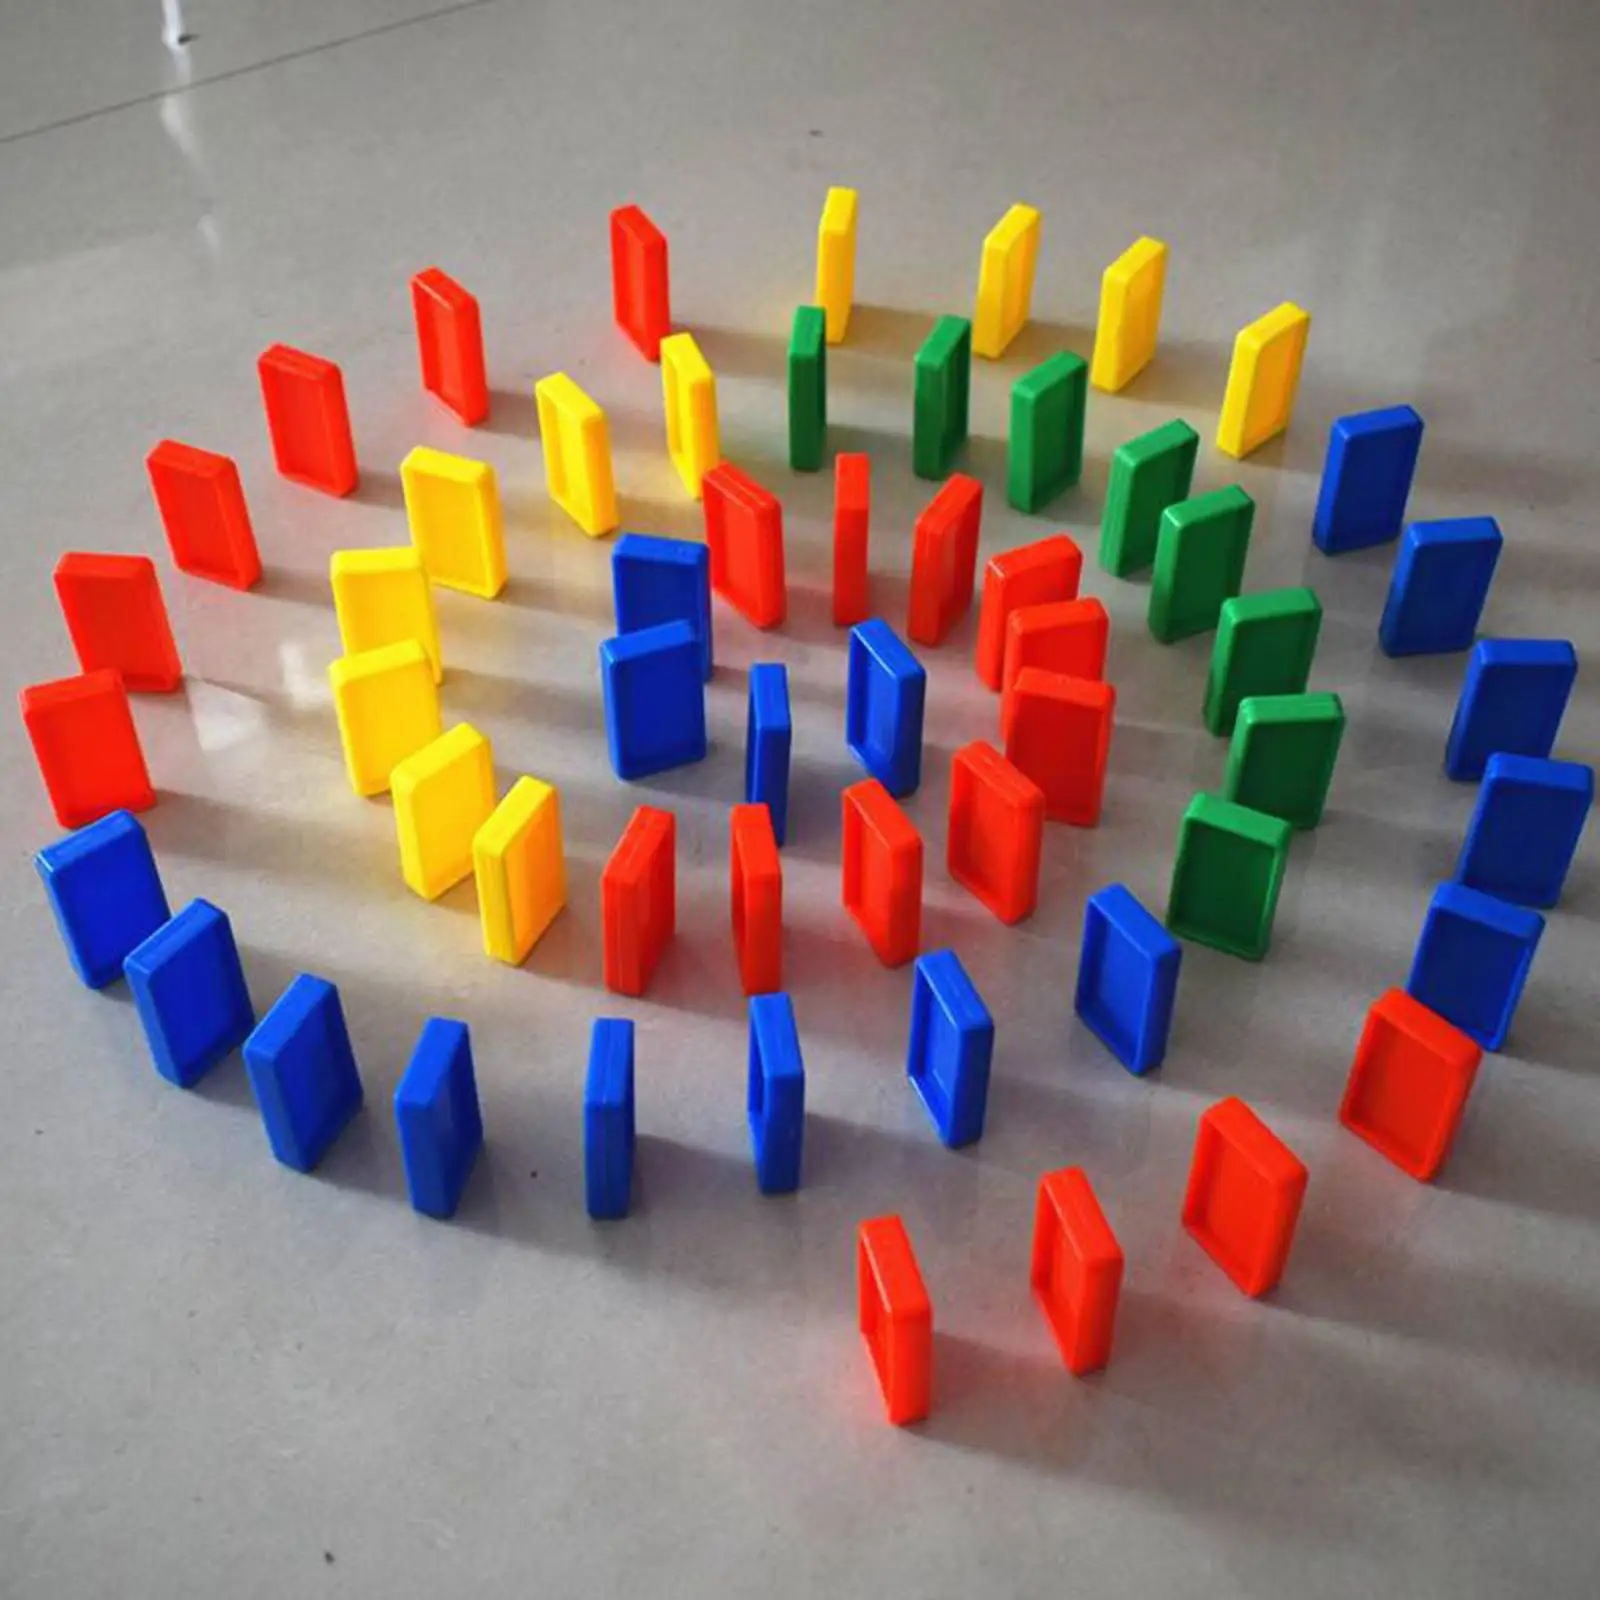 100x Dominoes Train Blocks Set Game Stacking Toy Building Educational Play Toy for Toddler Children Kids Birthday Gifts